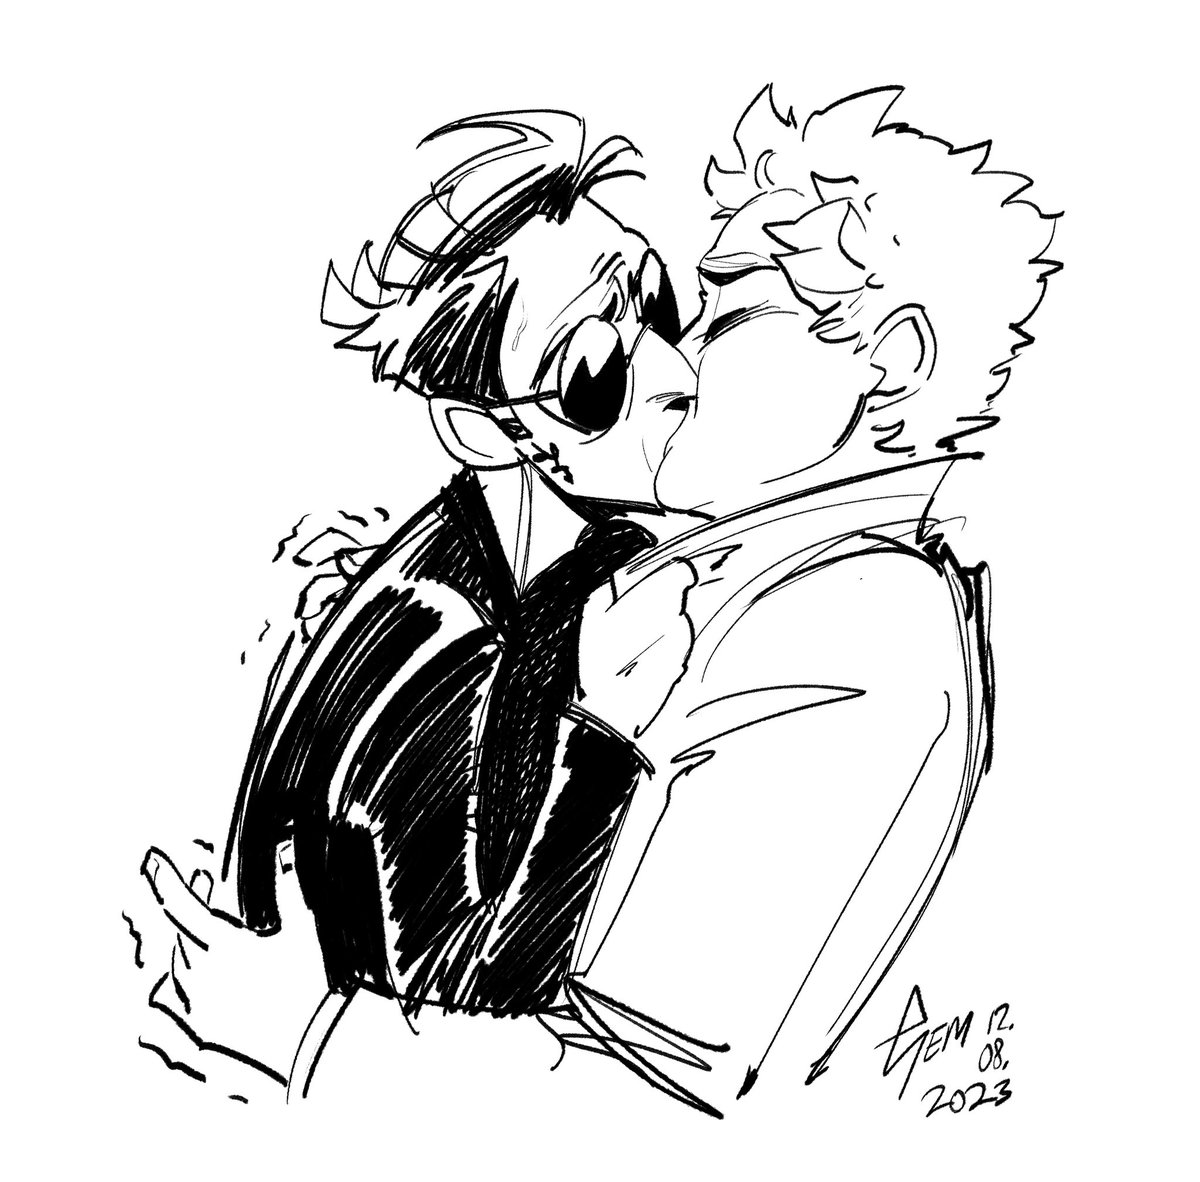 #GoodOmens2Spoilers #go2spoilers

Speed drawn THE KISS from memory cos its imprinted on me that much